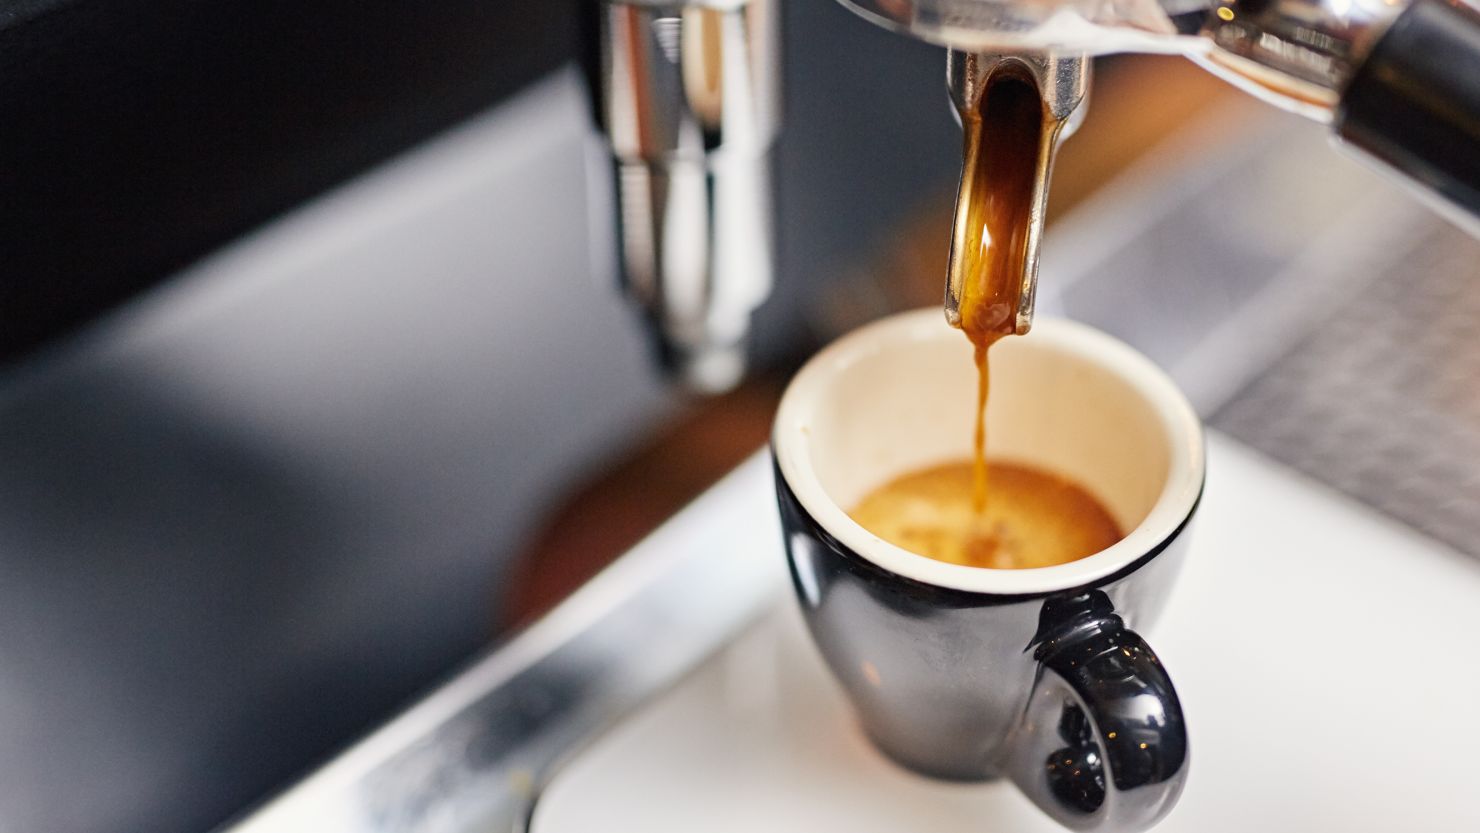 What is Espresso? What is Espresso Shot? + More